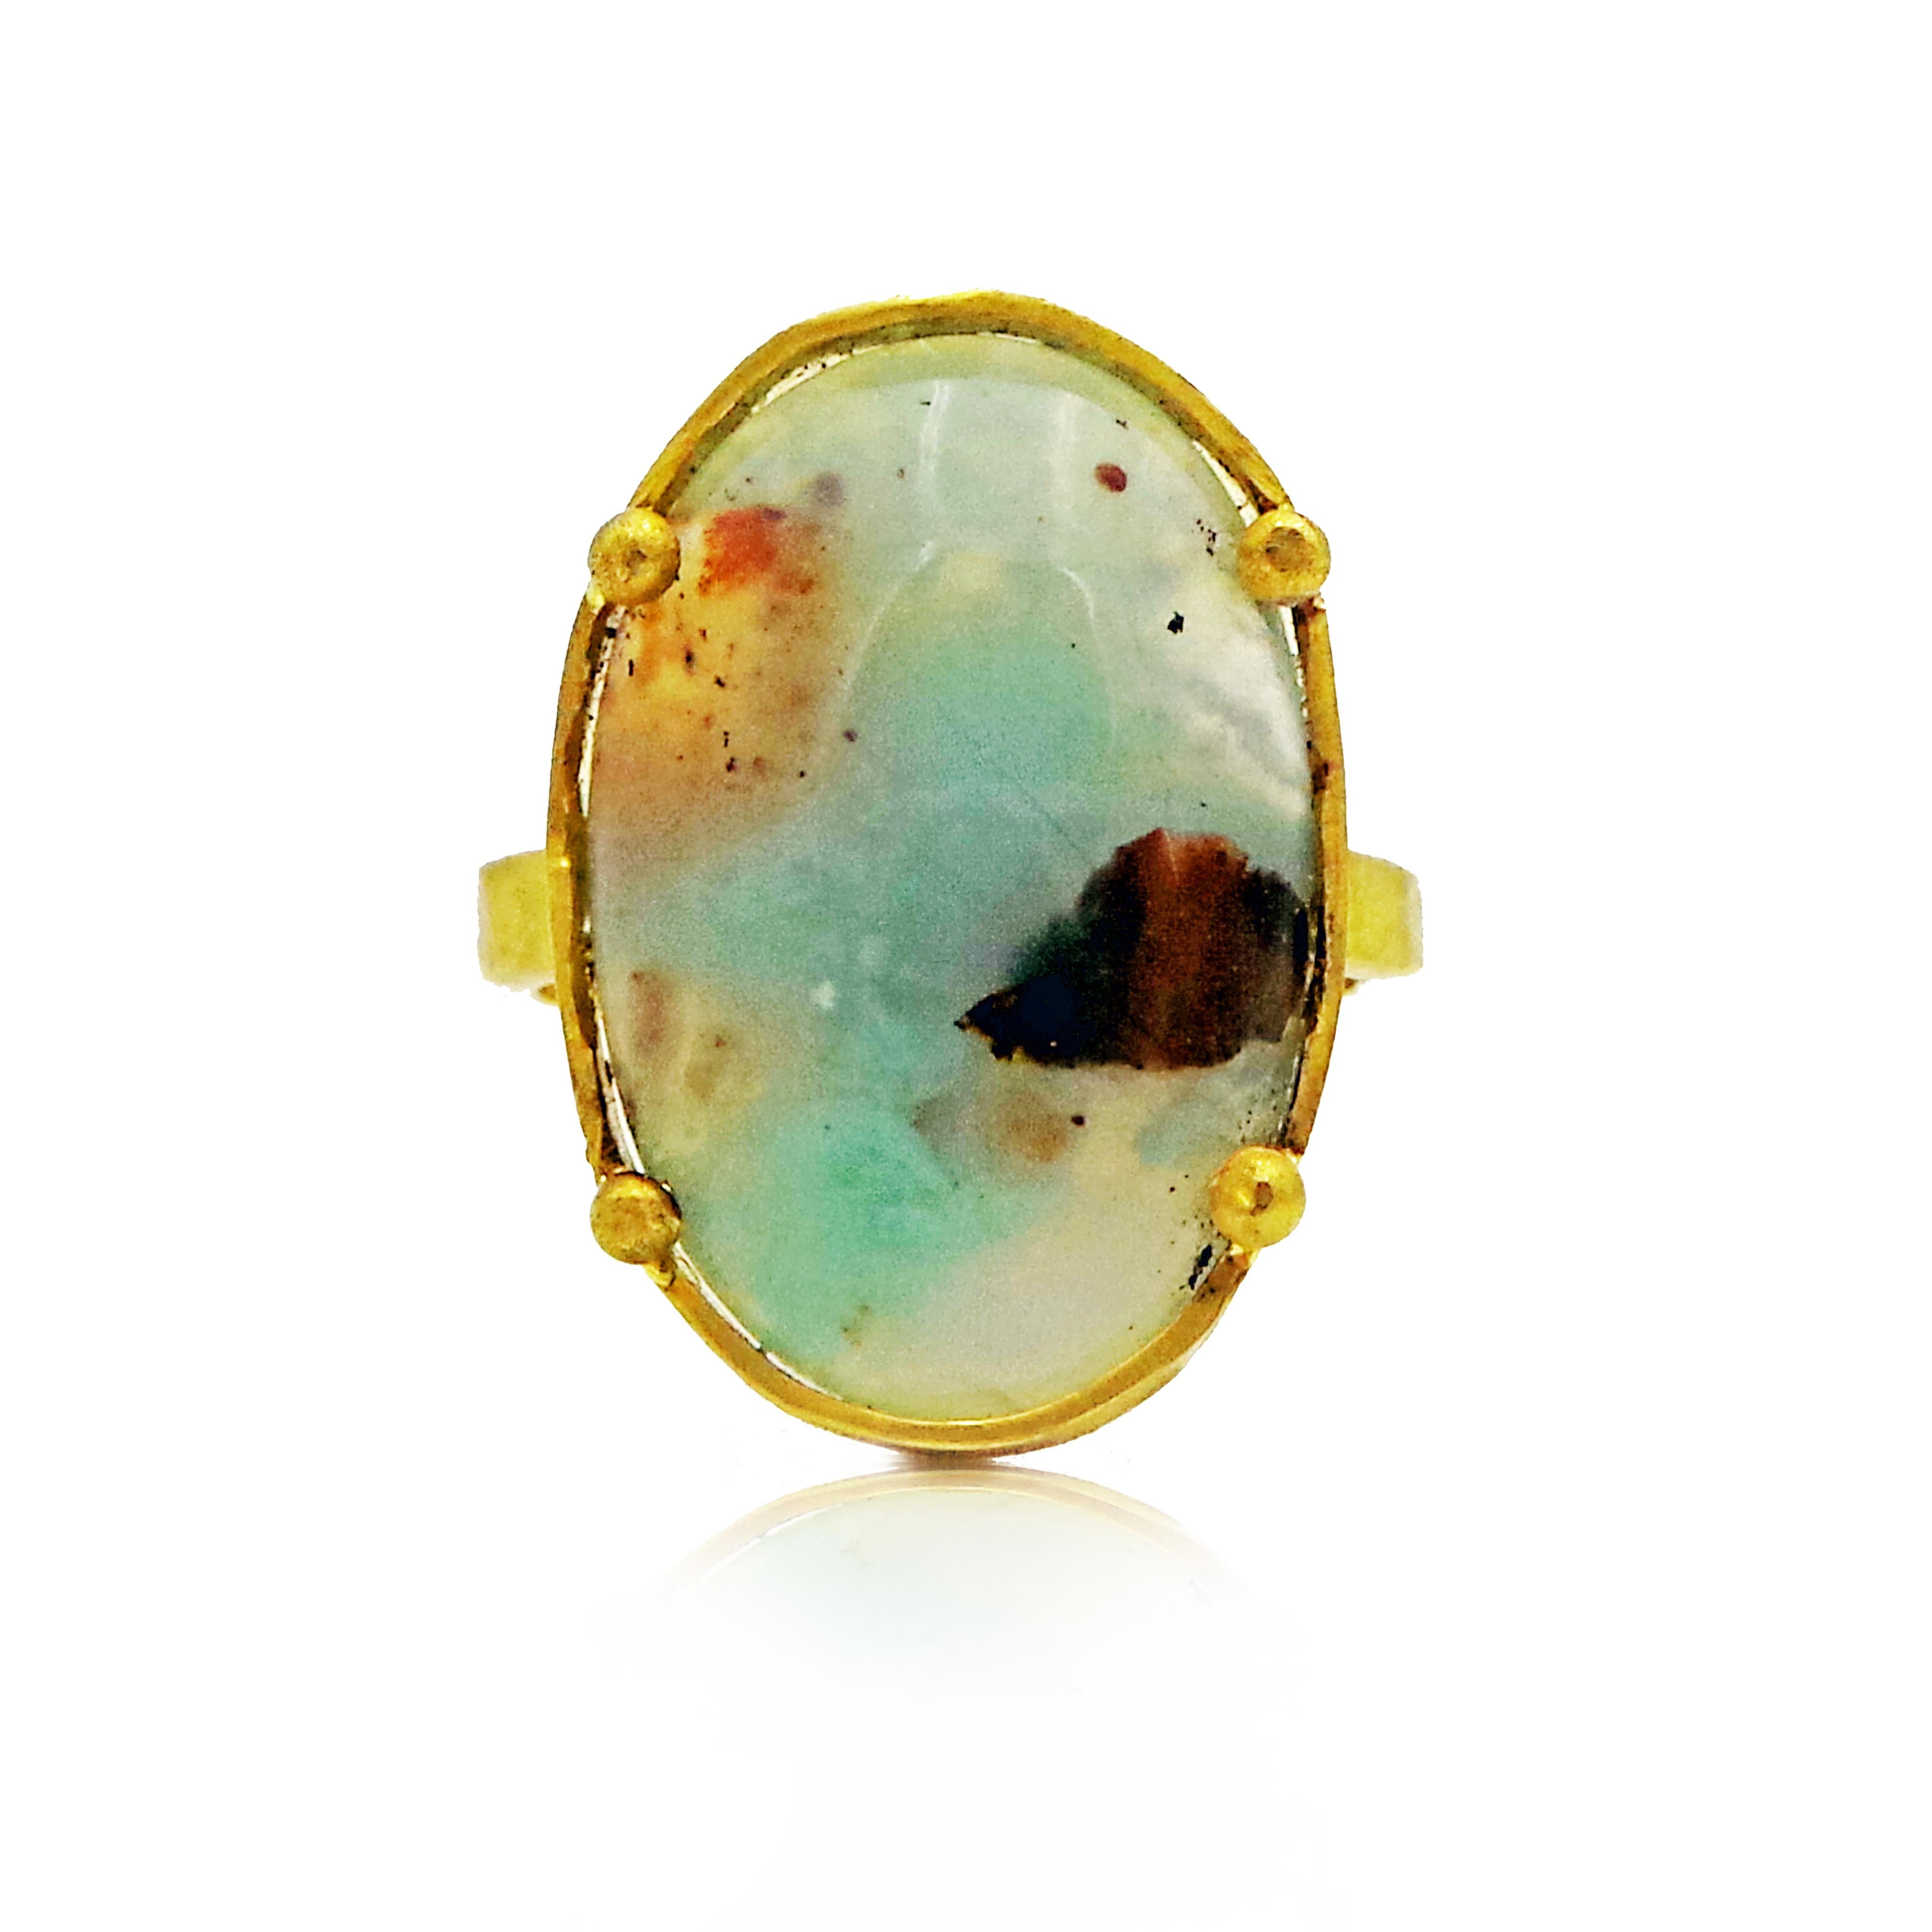 Oval Aquaprase gemstone set in 22k yellow gold hand-forged cocktail ring finished with a hammered, rustic texture. Size 7. Aquaprase is one of the most recently discovered gemstones, being unearthed in 2014 by a gem explorer in Africa. Its